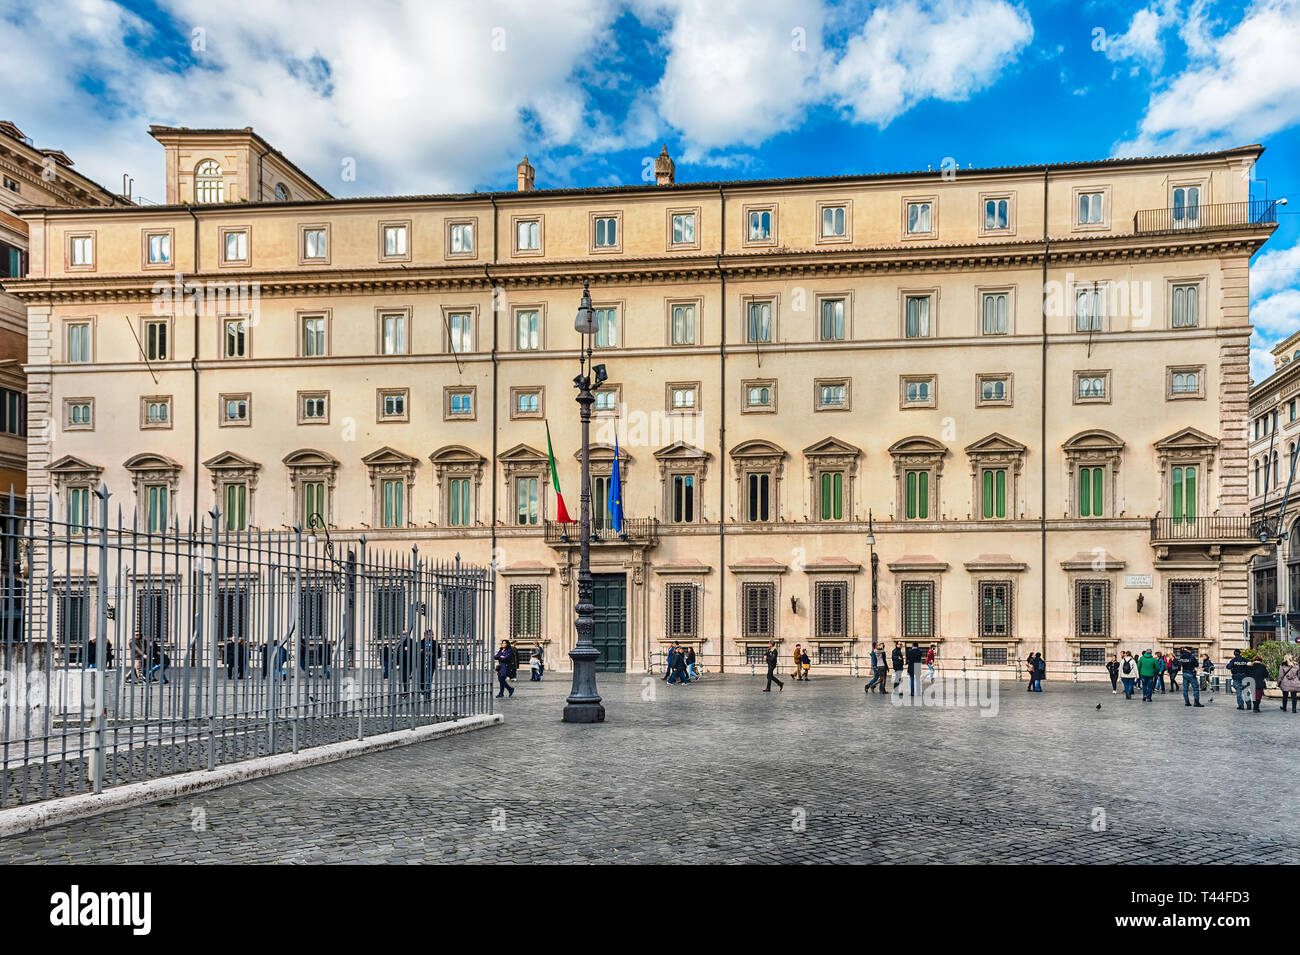 ROME - NOVEMBER 18: Facade of Palazzo Chigi, iconic building in central Rome, Italy, November 18, 2018. It is the official residence of the Prime Mini Stock Photo